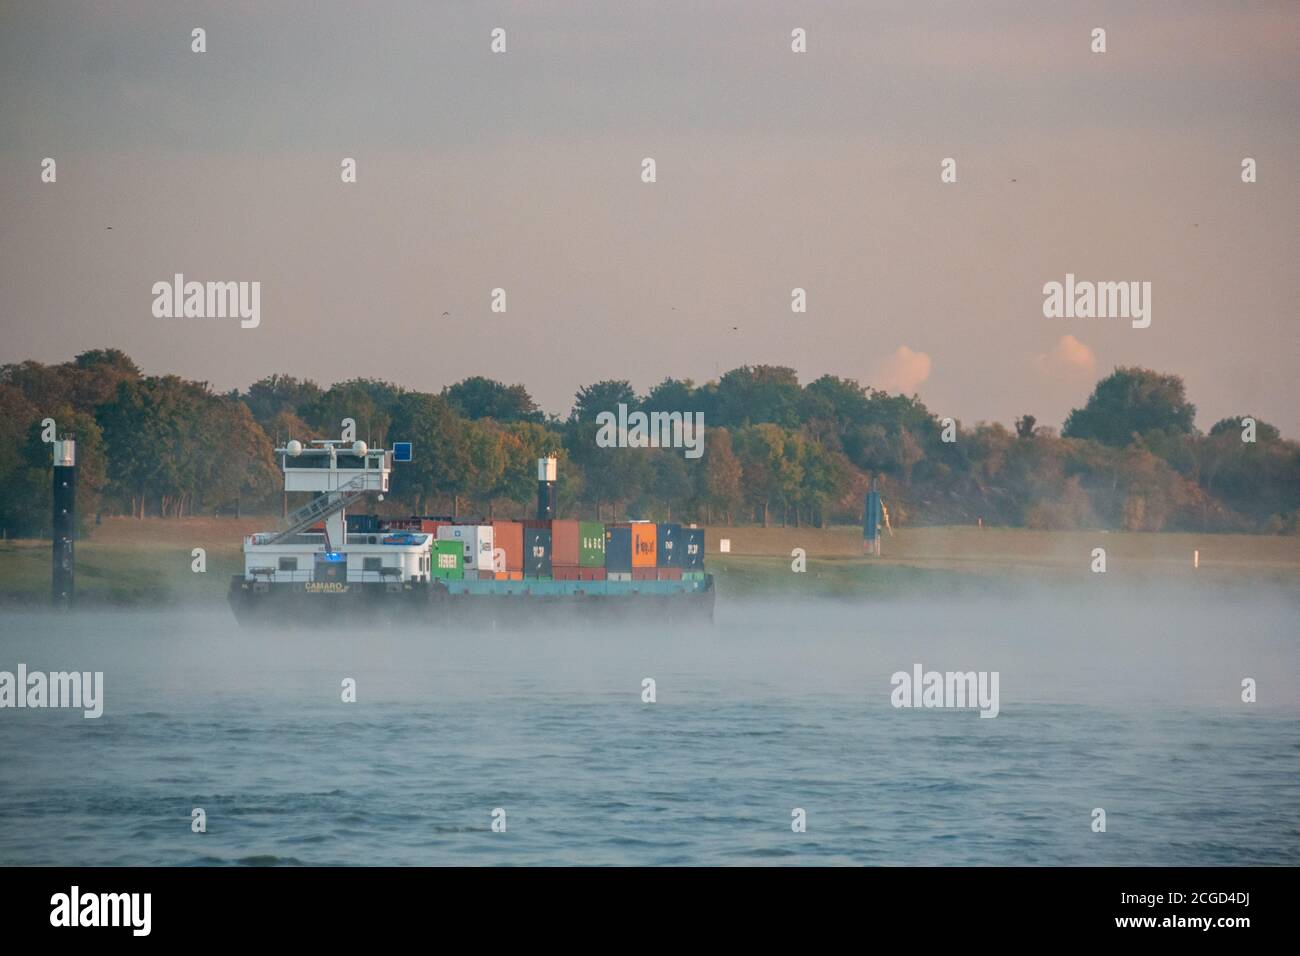 Cologne Germany August 2020, Inland shipping transport on the rhine river with containers, Large container and oiltanker vessel on the river rhein in Stock Photo